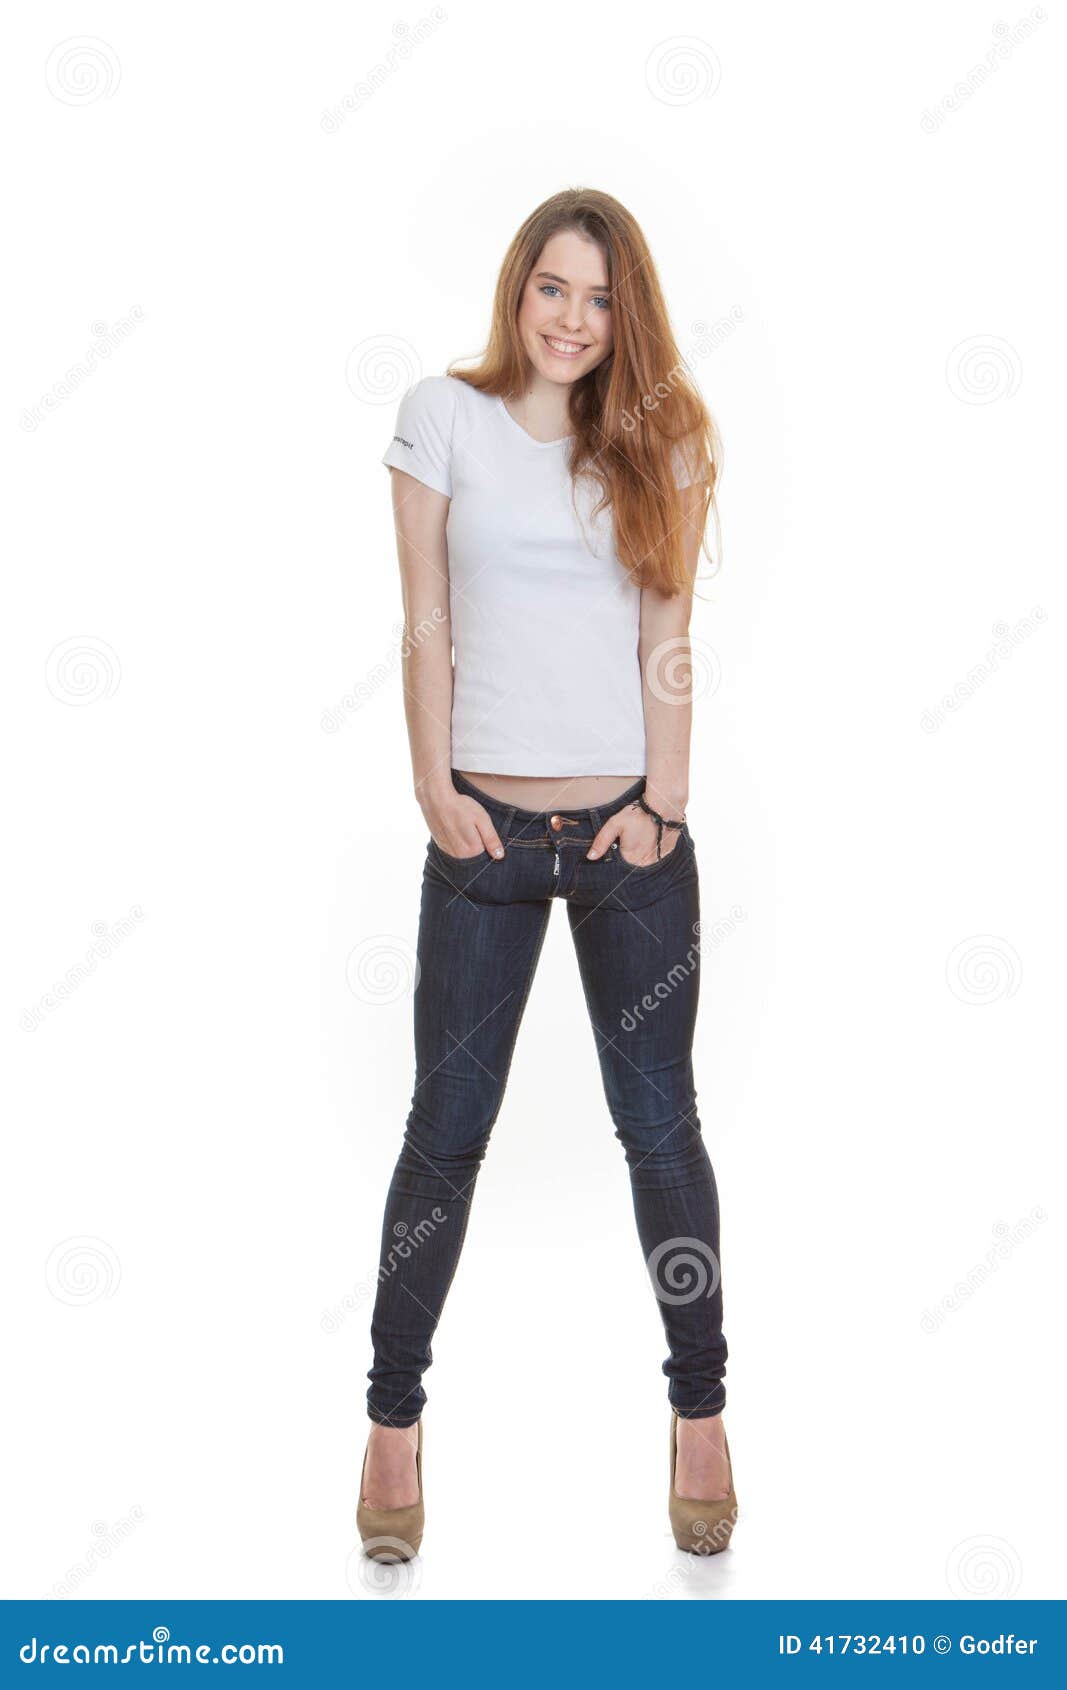 Attractive Teen Fashion Model Posing Stock Photo - Image of jeans ...